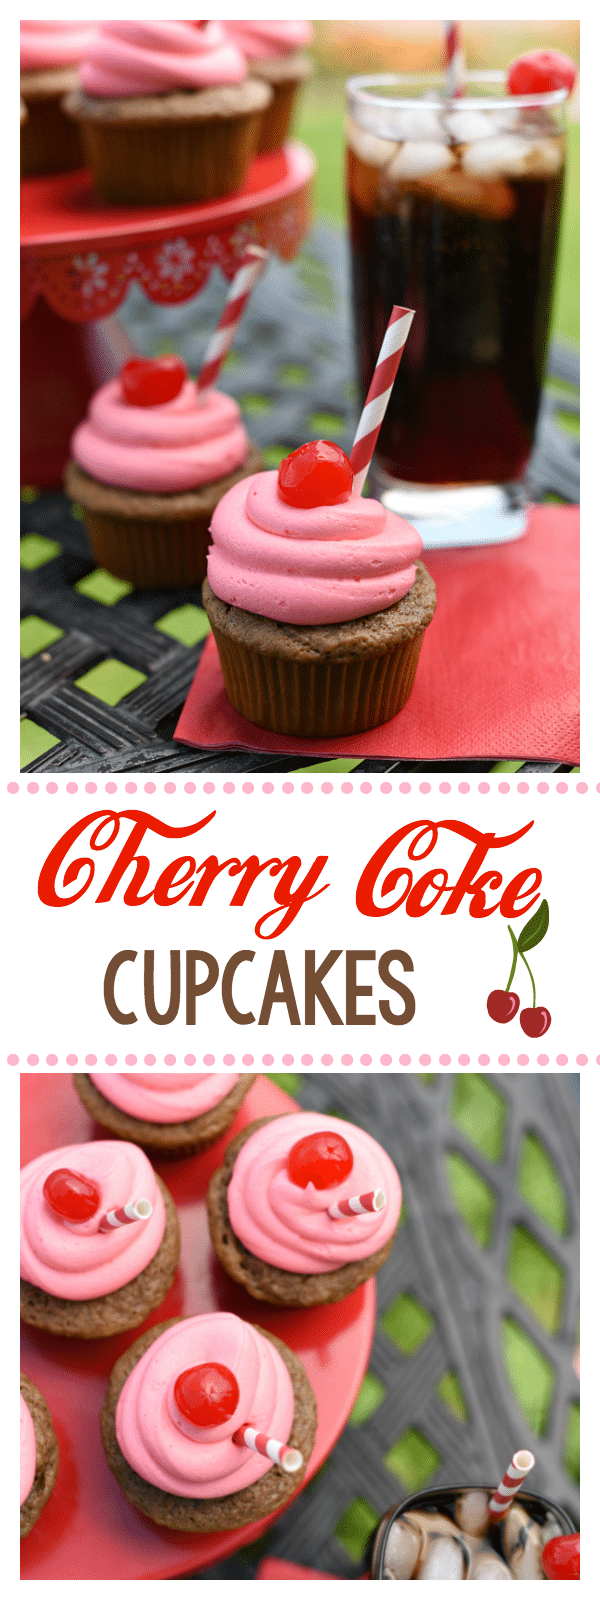 Cherry Coke Cupcakes. Learn how to make this easy cupcake recipe. So tasty and so fun for any occasion. #easycupcakerecipe #cherrycokecupcakes #cupcakerecipe #cupcakes